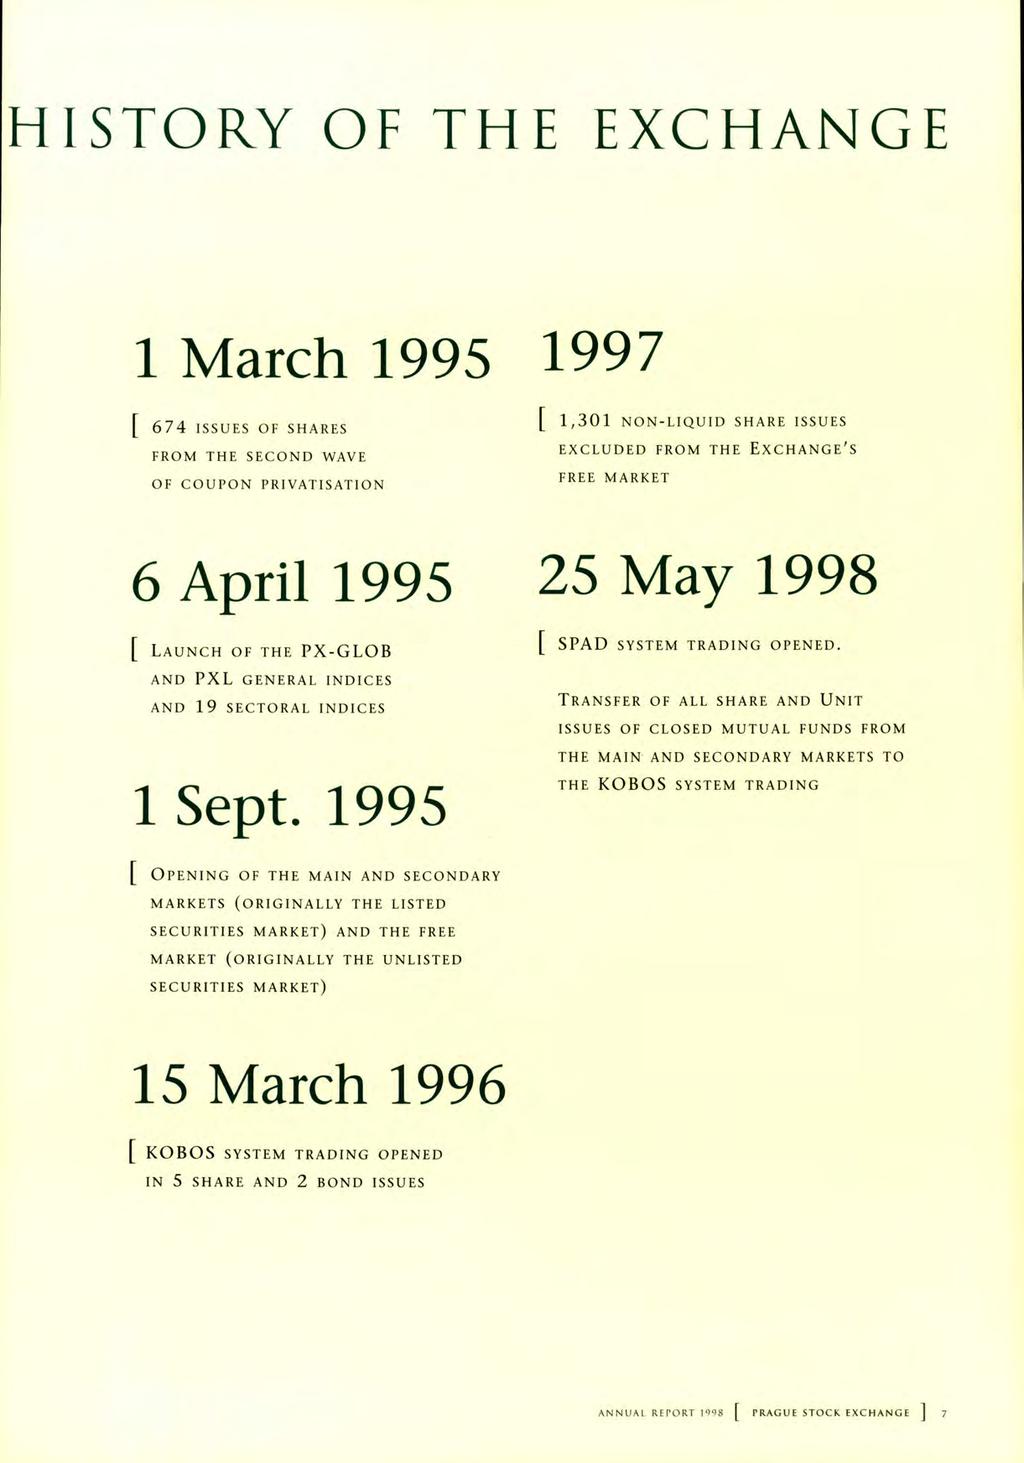 HISTORY OF THE EXCHANGE 1 March 1995 6 7 4 ISSUES OF SHARES FROM THE SECOND WAVE OF COUPON PRIVATISATION 1997 1,301 NON-LIQUID SHARE ISSUES EXCLUDED FROM THE EXCHANGE'S FREE MARKET 6 April 1995 25